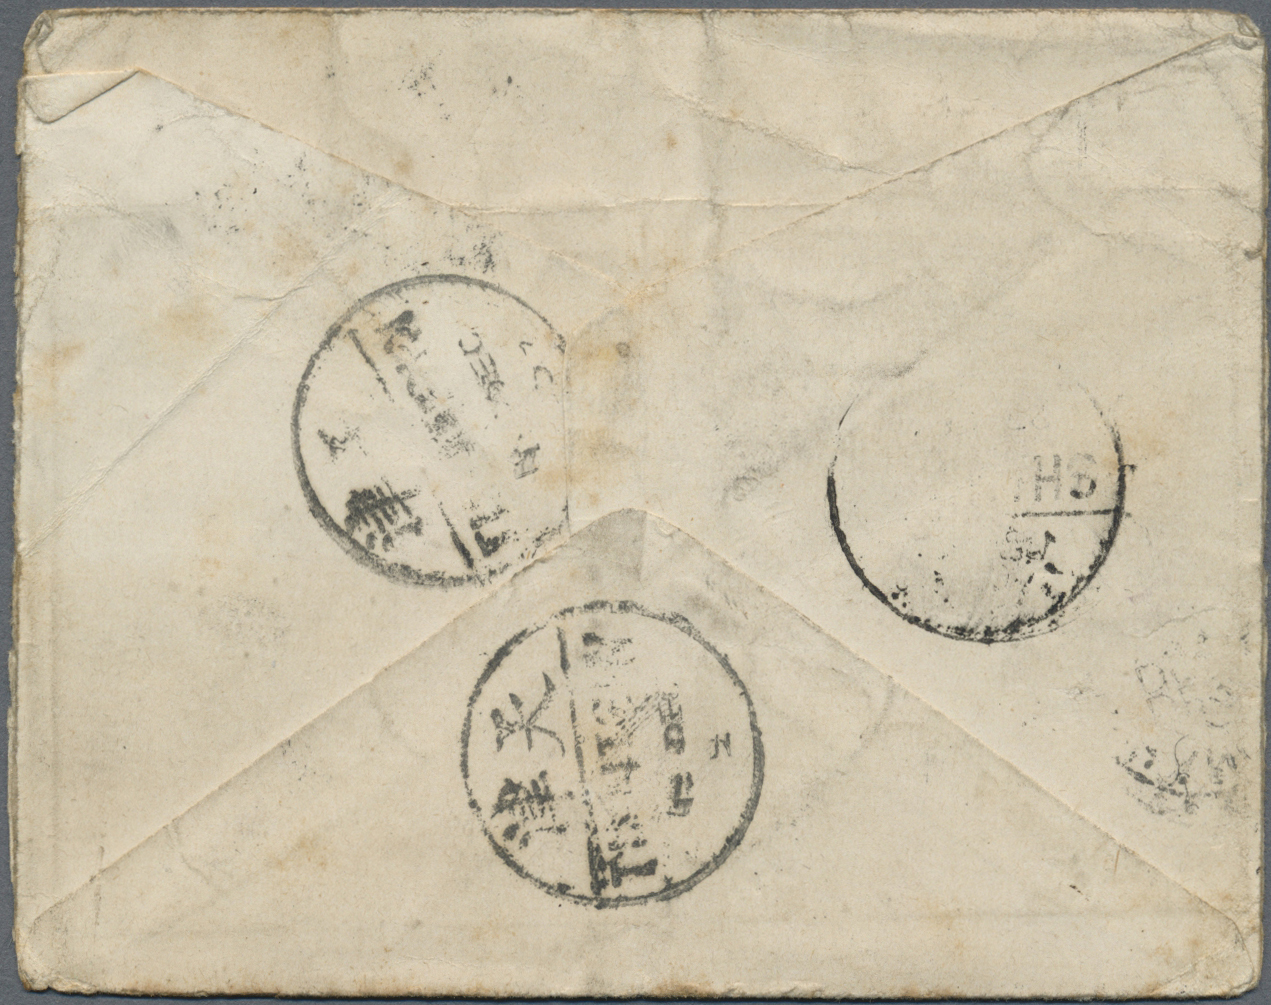 Br Hongkong - Britische Post In China: 1899. Envelope (faults,soiled, Three Sides Opend) Addressed To France Bearing Chi - Covers & Documents